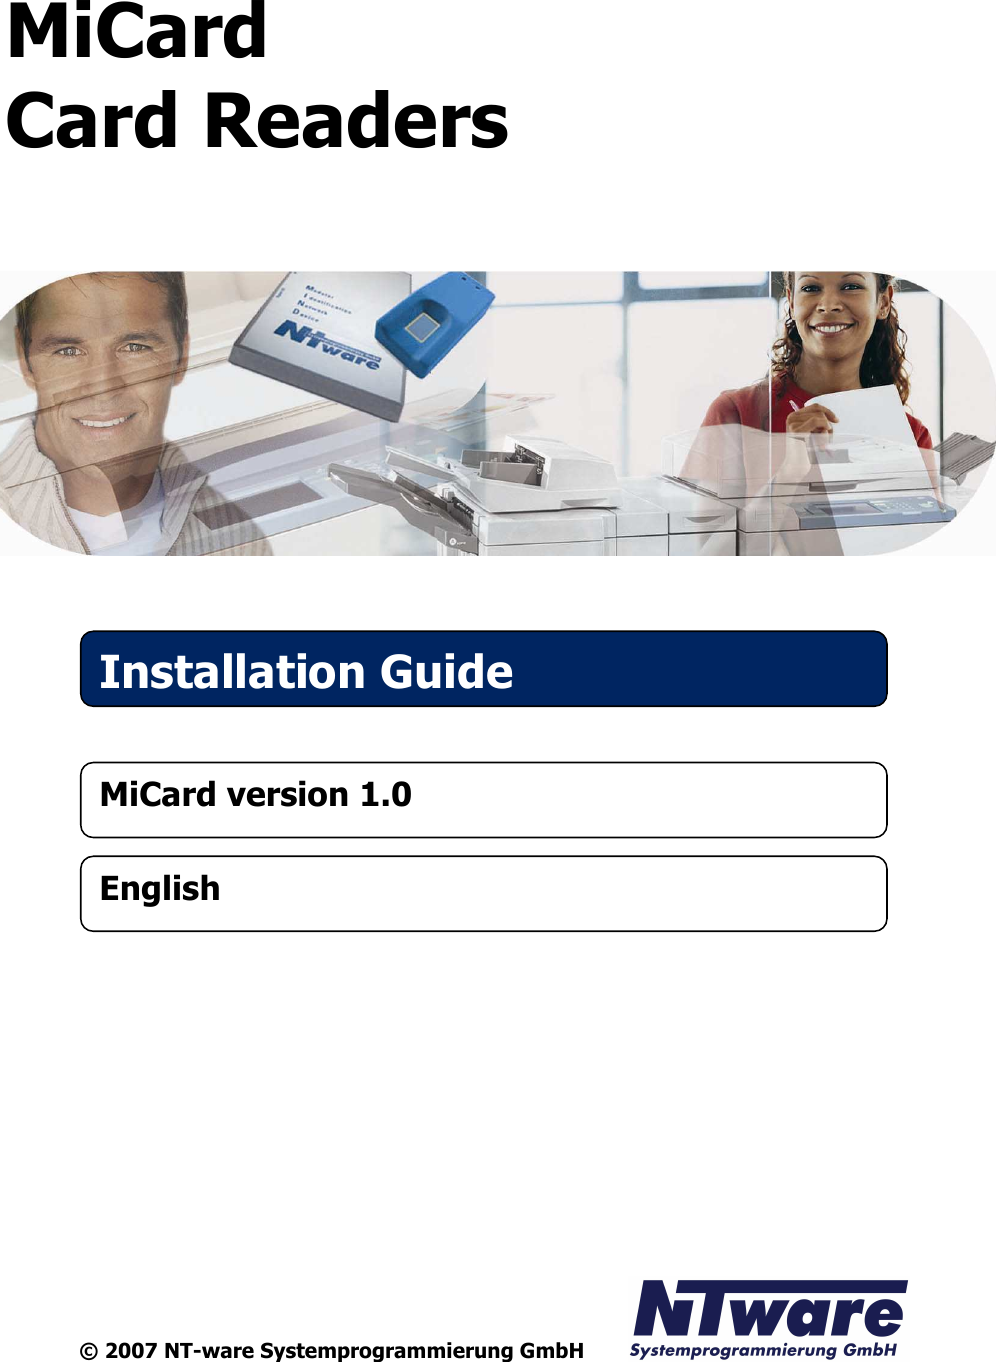  MiCard   Card Readers             © 2007 NT-ware Systemprogrammierung GmbH Installation Guide MiCard version 1.0 English   